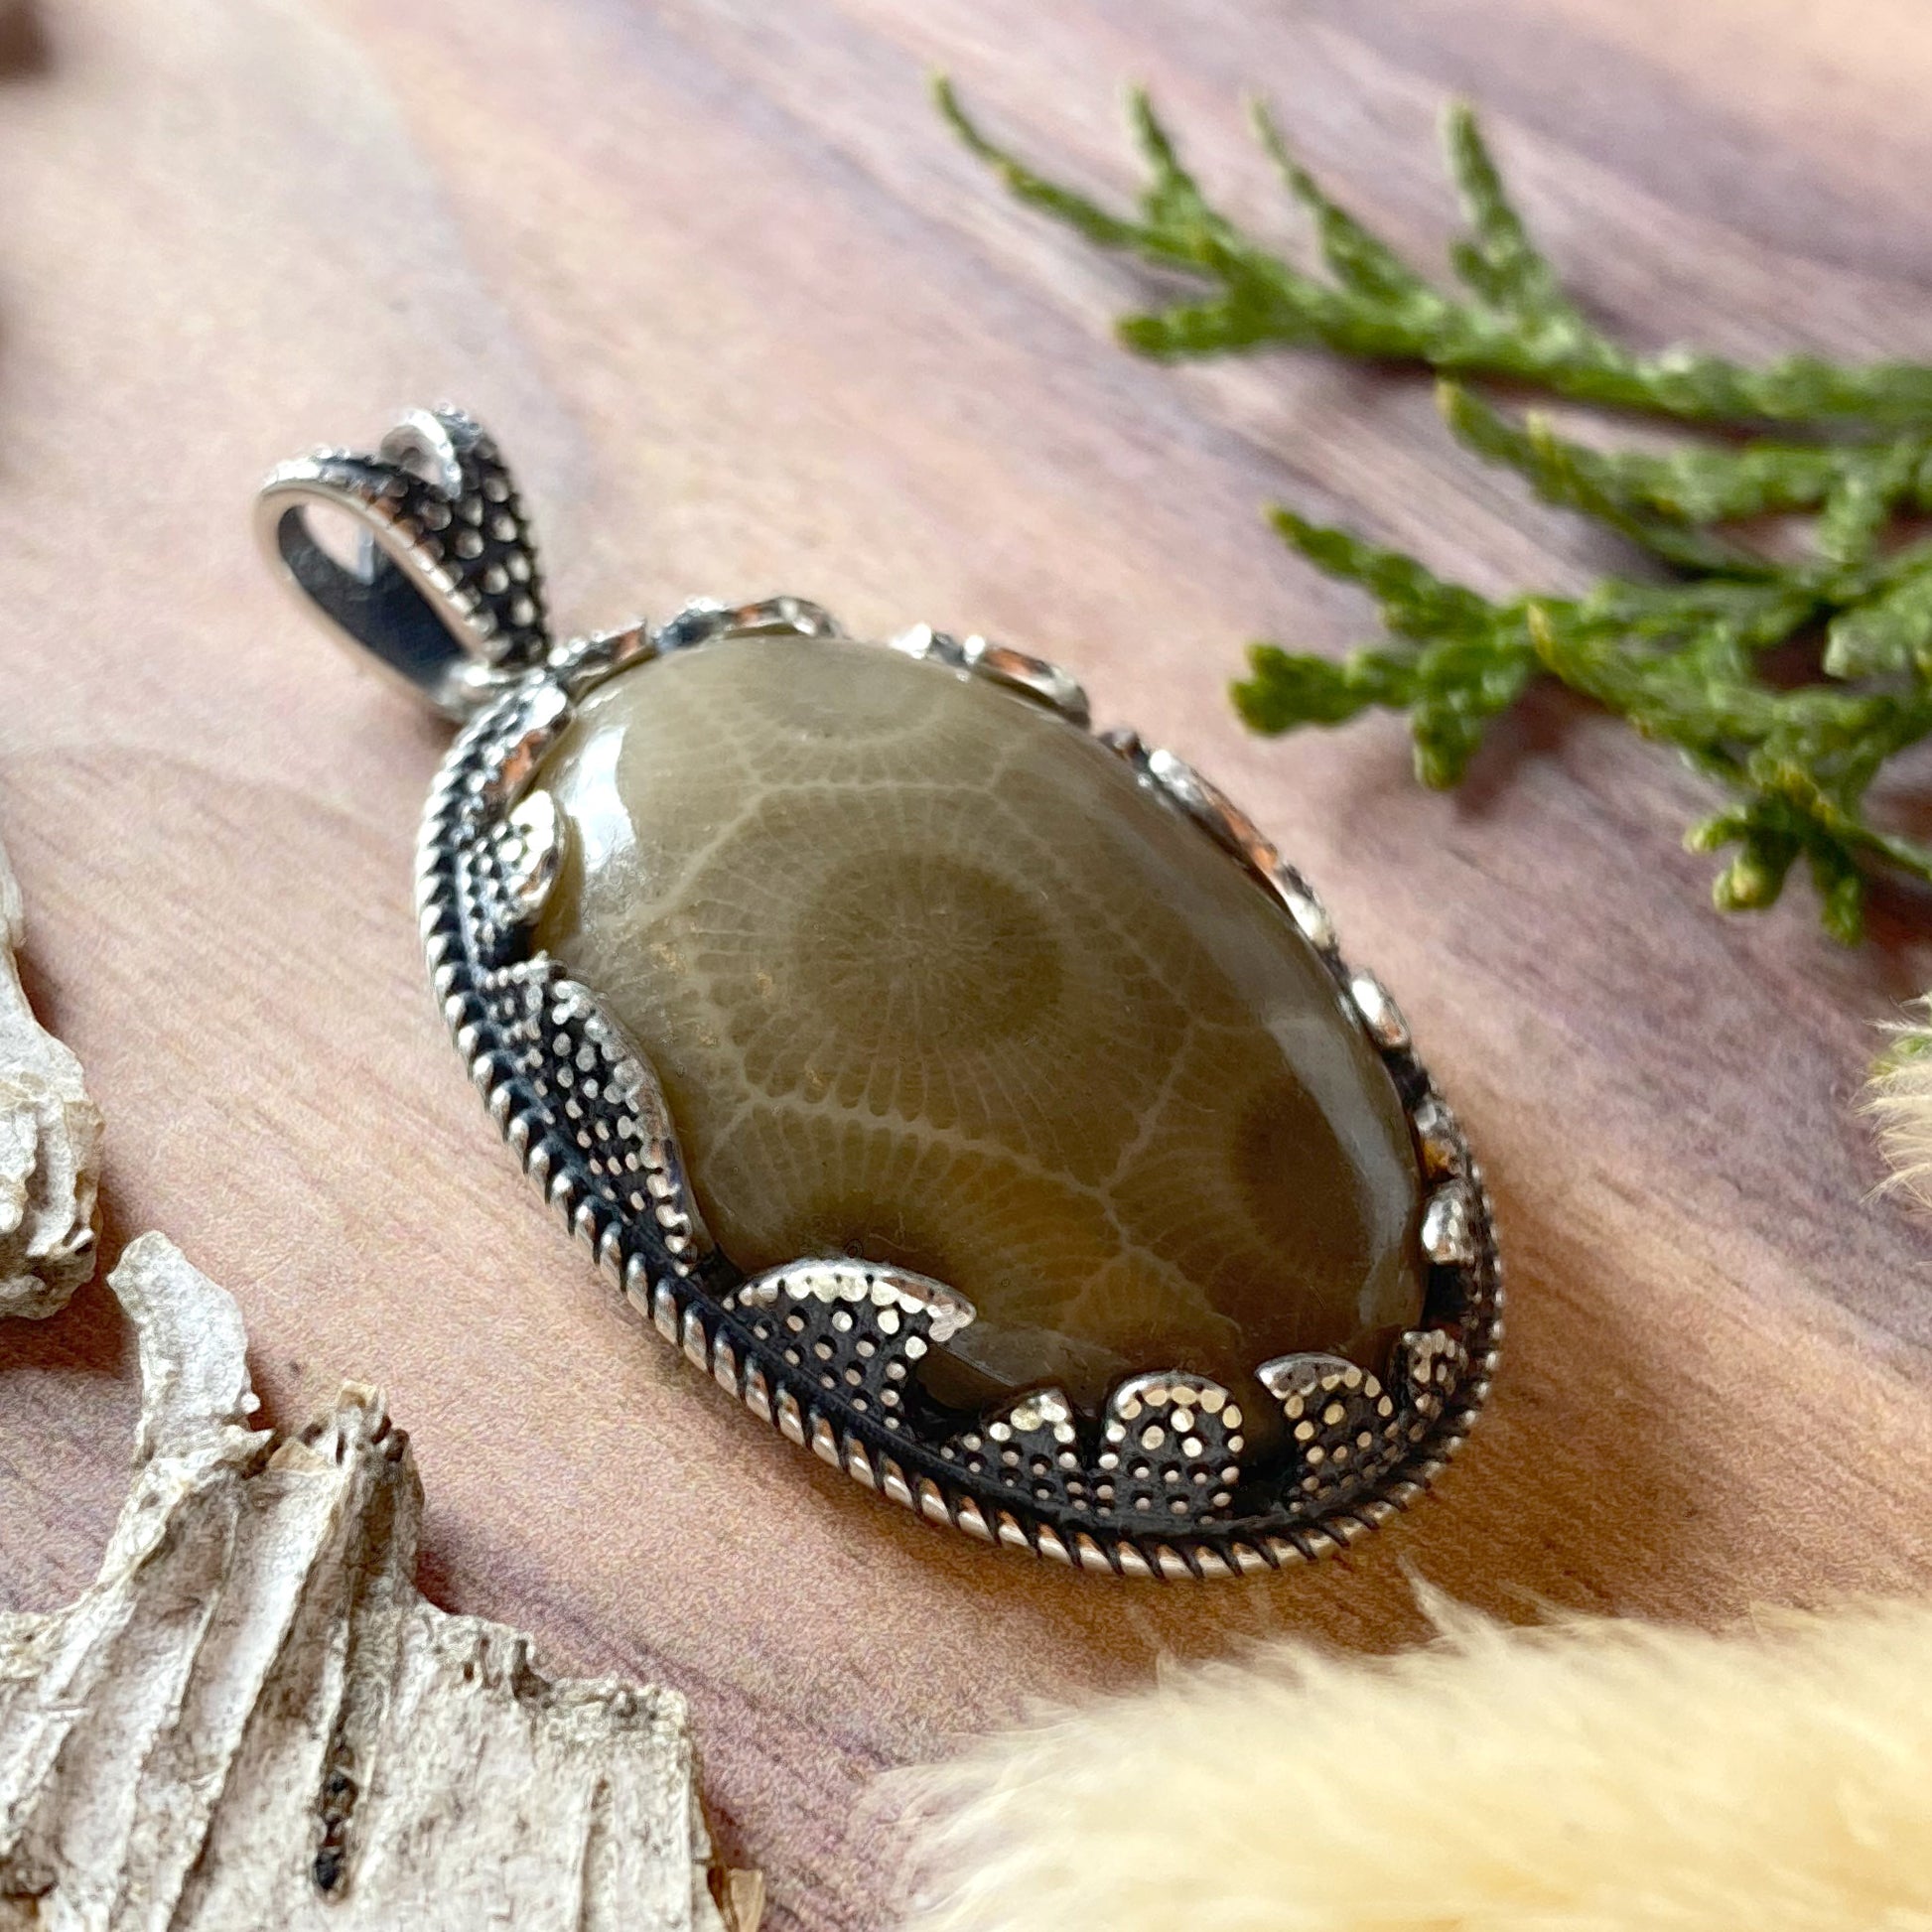 Petoskey Stone Pendant Front View II - Stone Treasures by the Lake